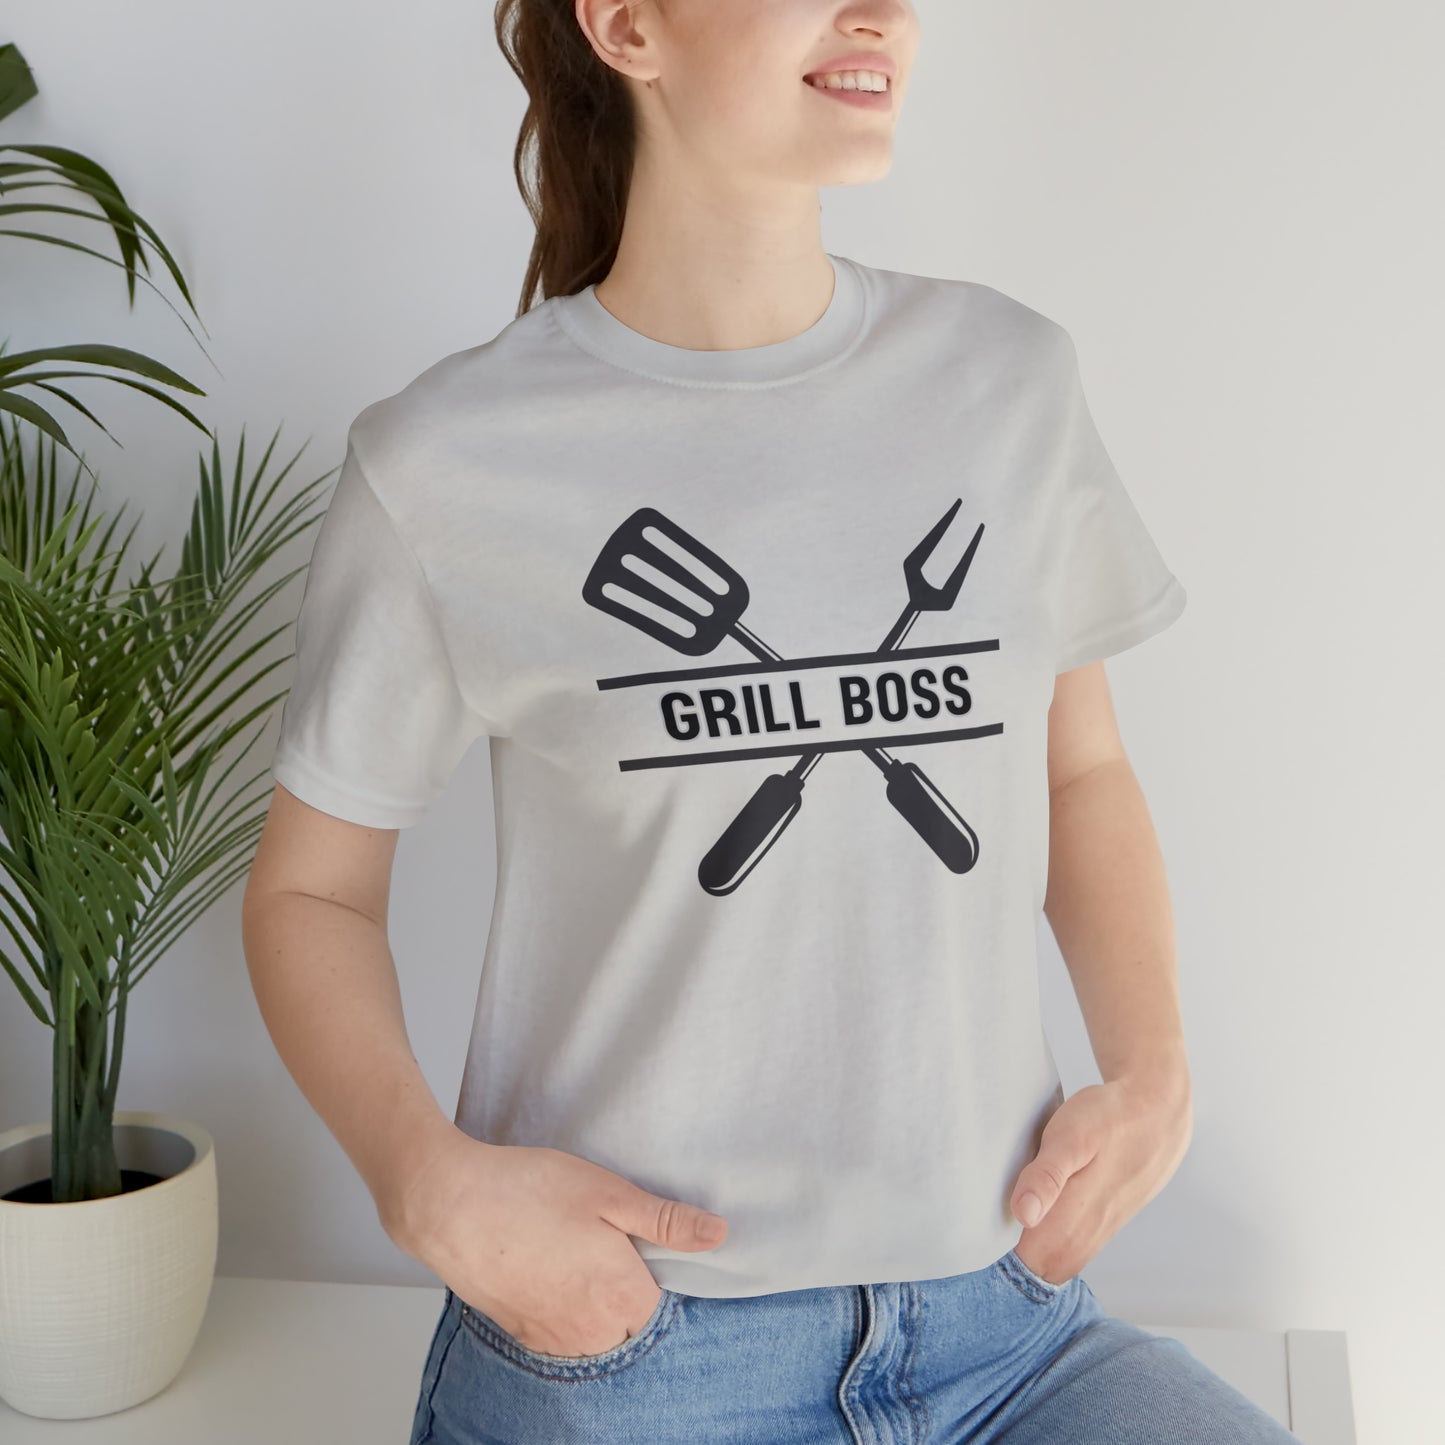 Hobby, Interest, Grilling, Family, Dad, Mom- Adult, Regular Fit, Soft Cotton, T-shirt